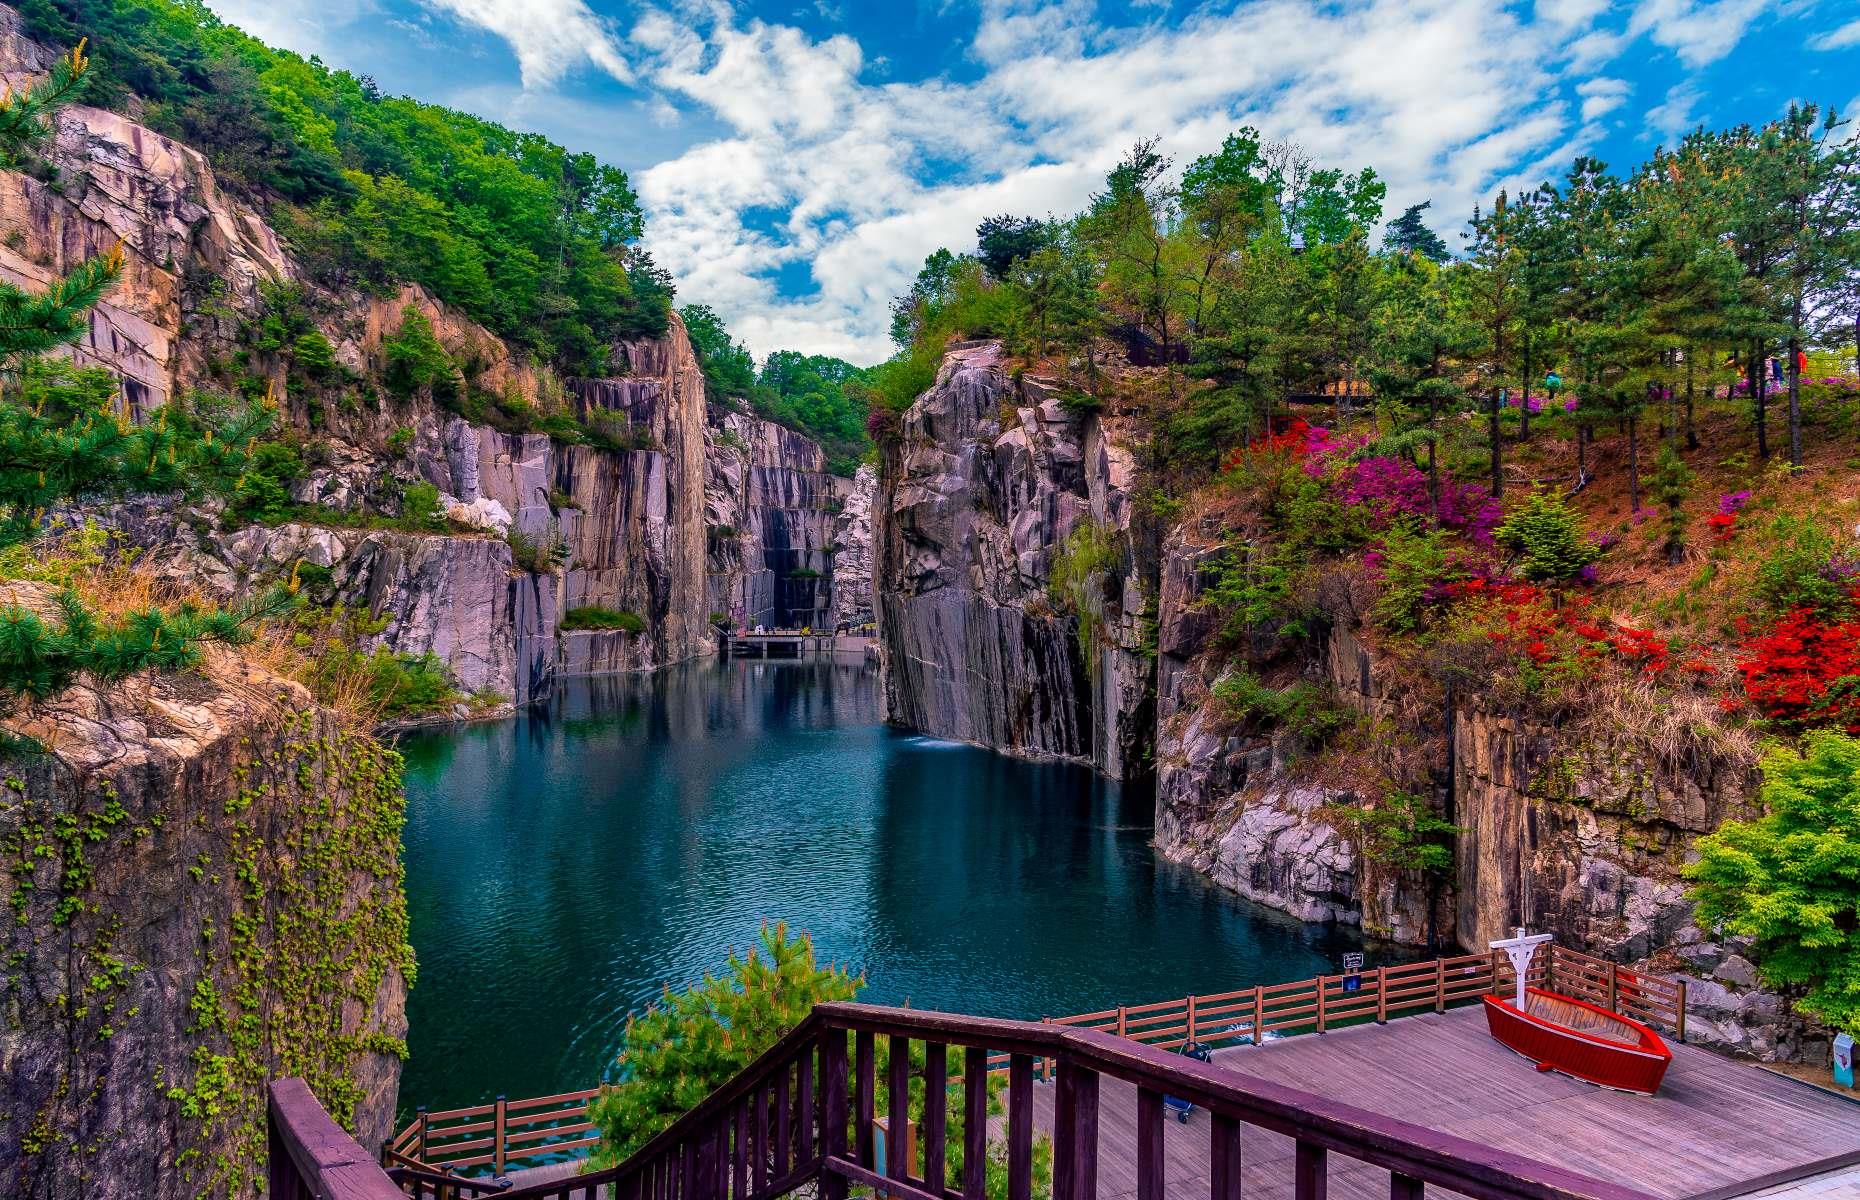 <p>This former rock quarry lay abandoned for decades until the 1990s, when it was finally given a new lease of life as the Pocheon Art Valley. You can still soak up the breathtaking natural beauty of Cheonjoho Lake (pictured) from the observation café and sky park, but it’s now home to an arts and culture complex too. A common date spot, the site boasts an outdoor sculpture park and a performance space nestled under the quarry cliffs, as well as an astronomy museum popular with families with children.</p>